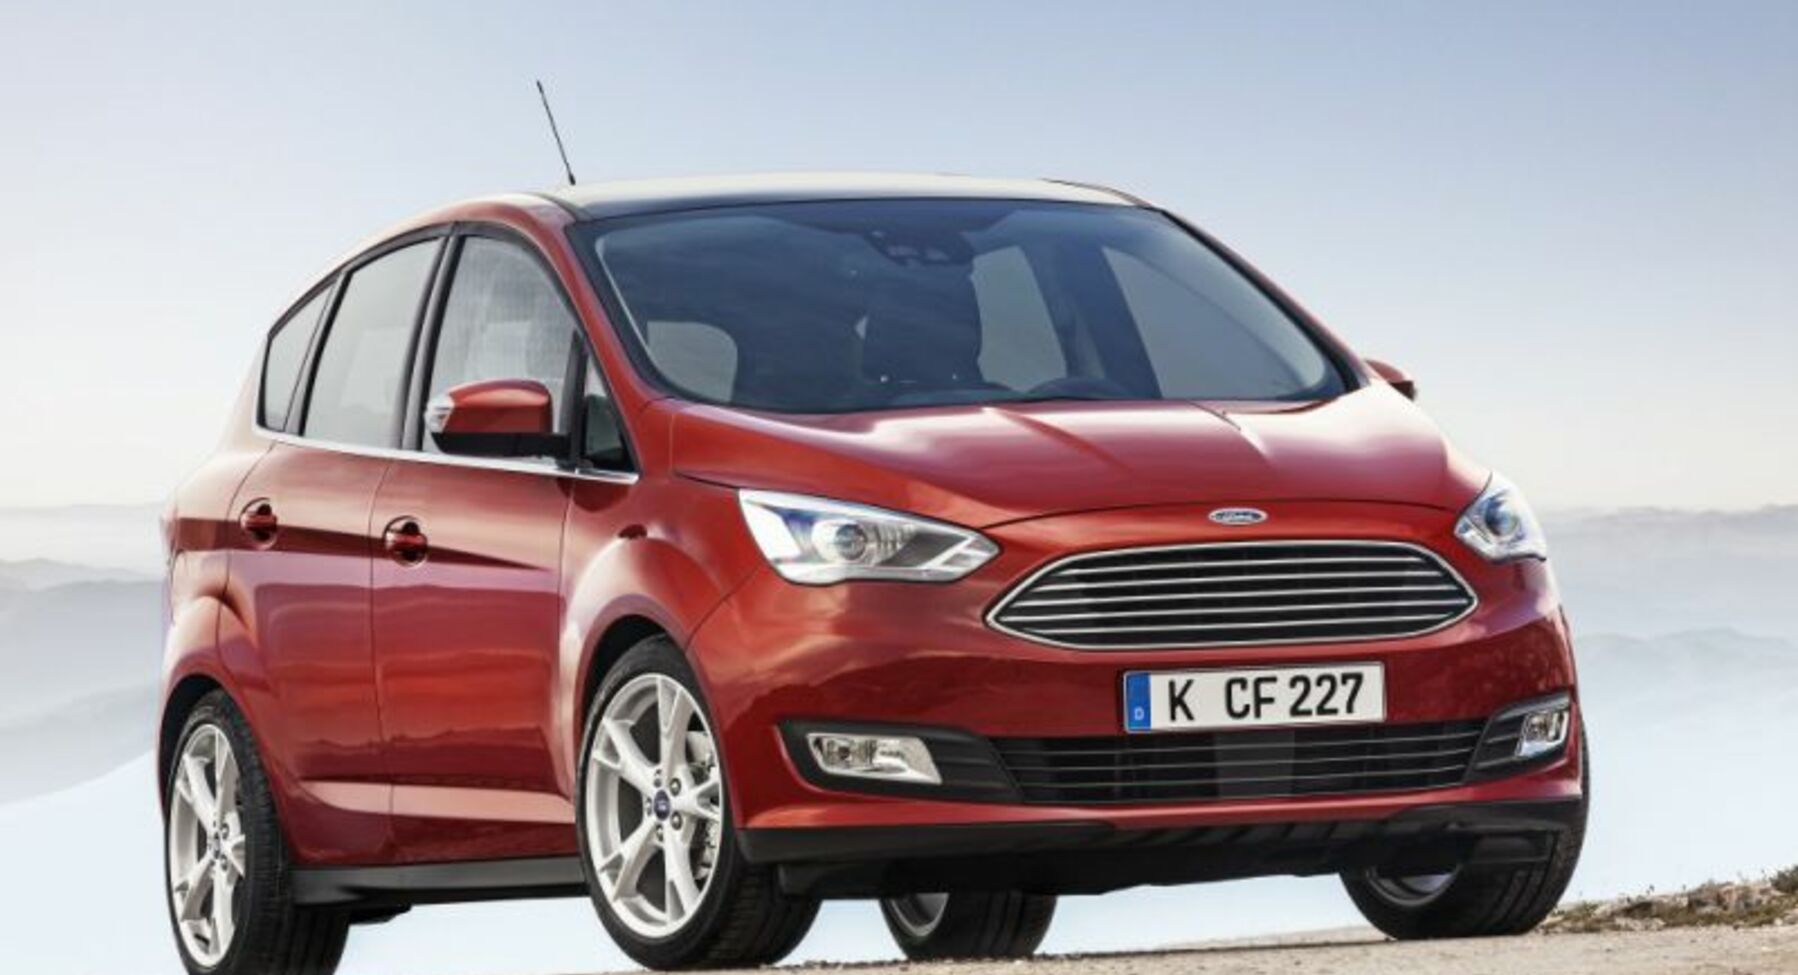 Ford C-MAX II (facelift 2015) 1.6 Ti-VCT (120 Hp) 2015, 2016, 2017, 2018, 2019, 2020, 2021